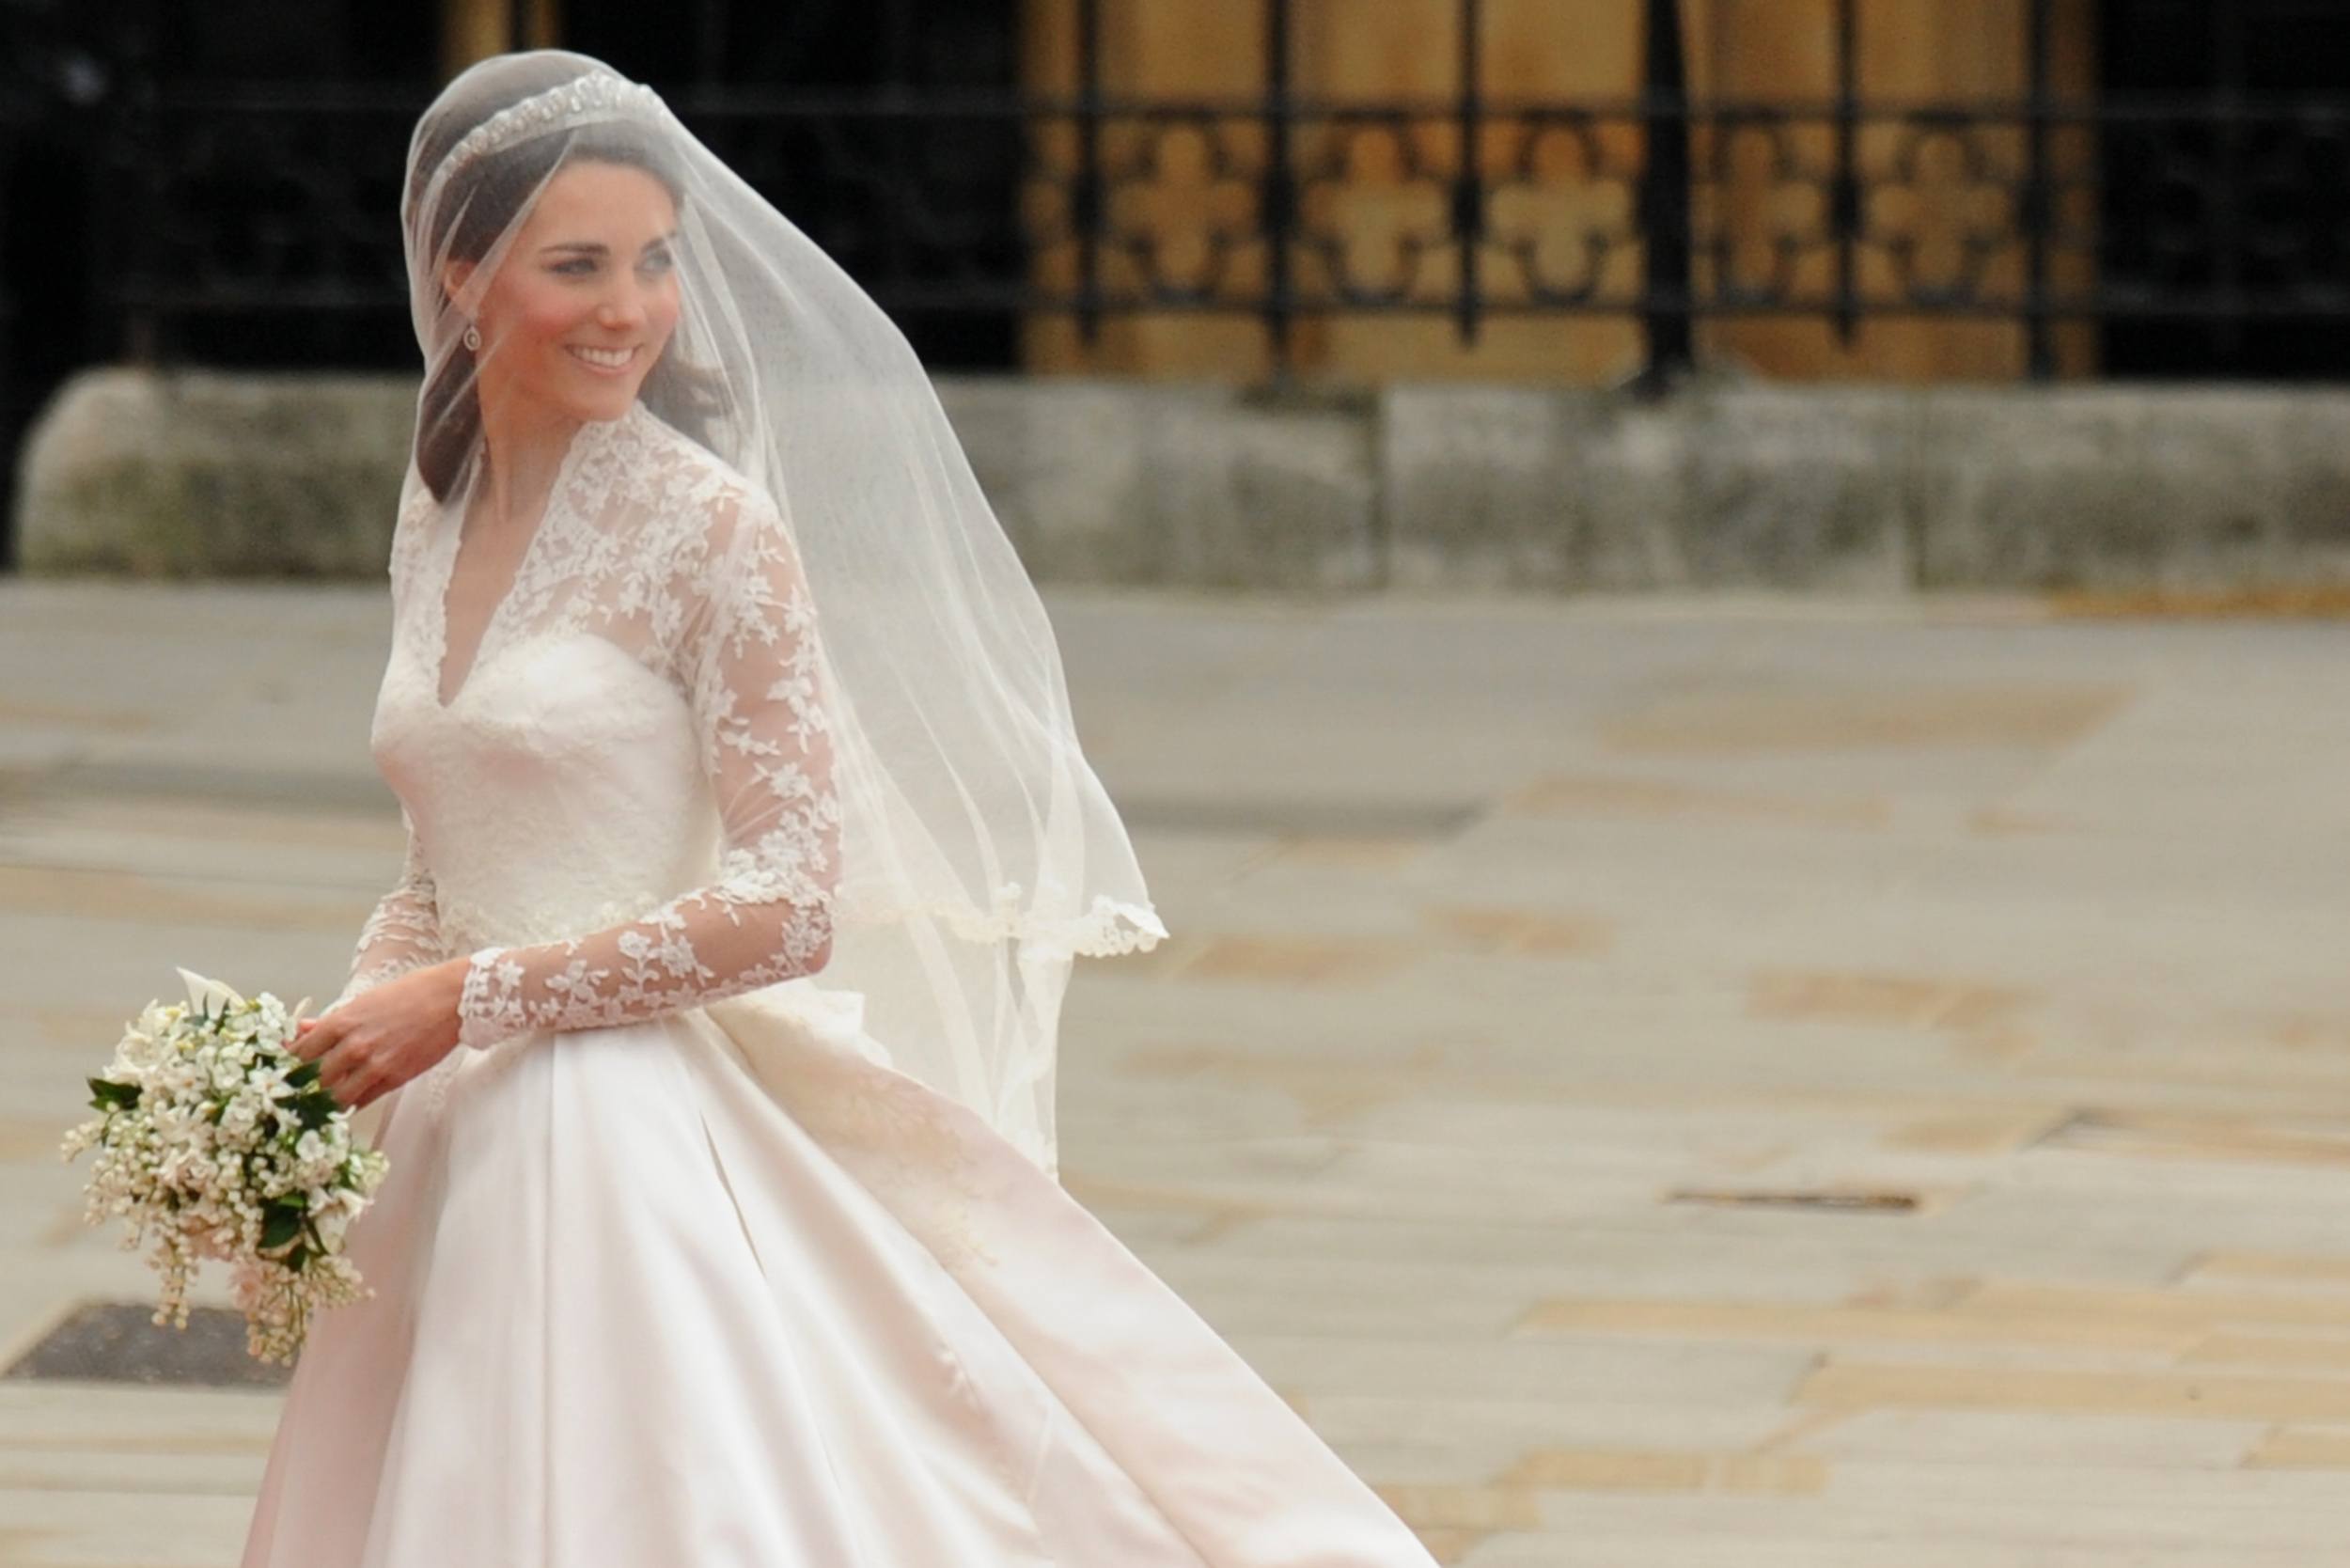 Here's Kate Middleton's Second Wedding Dress You Never Got to See